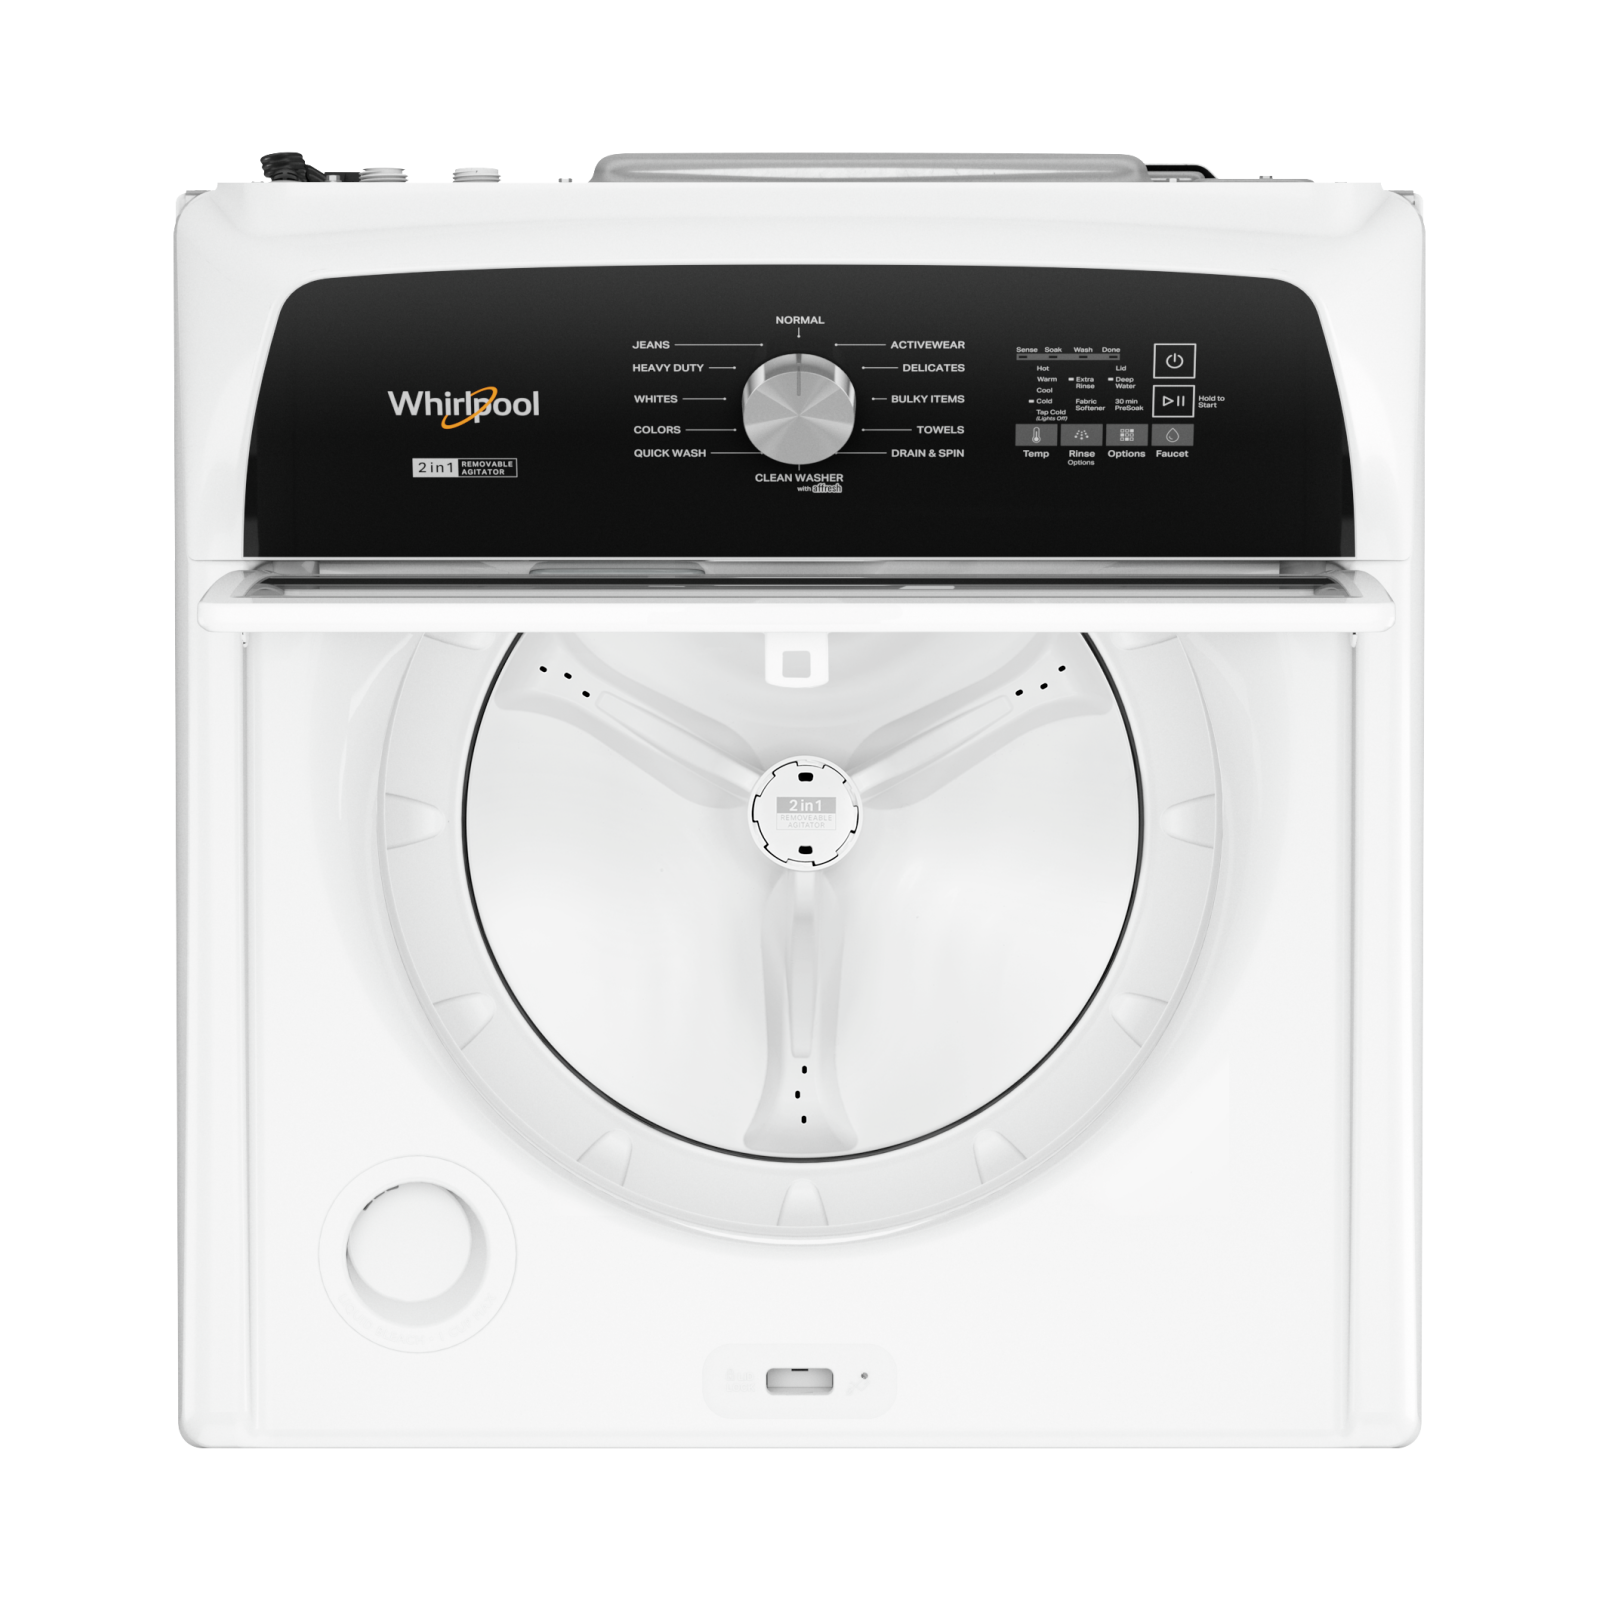 Whirlpool - 5.4 cu. Ft  Top Load Washer in White - WTW5057LW